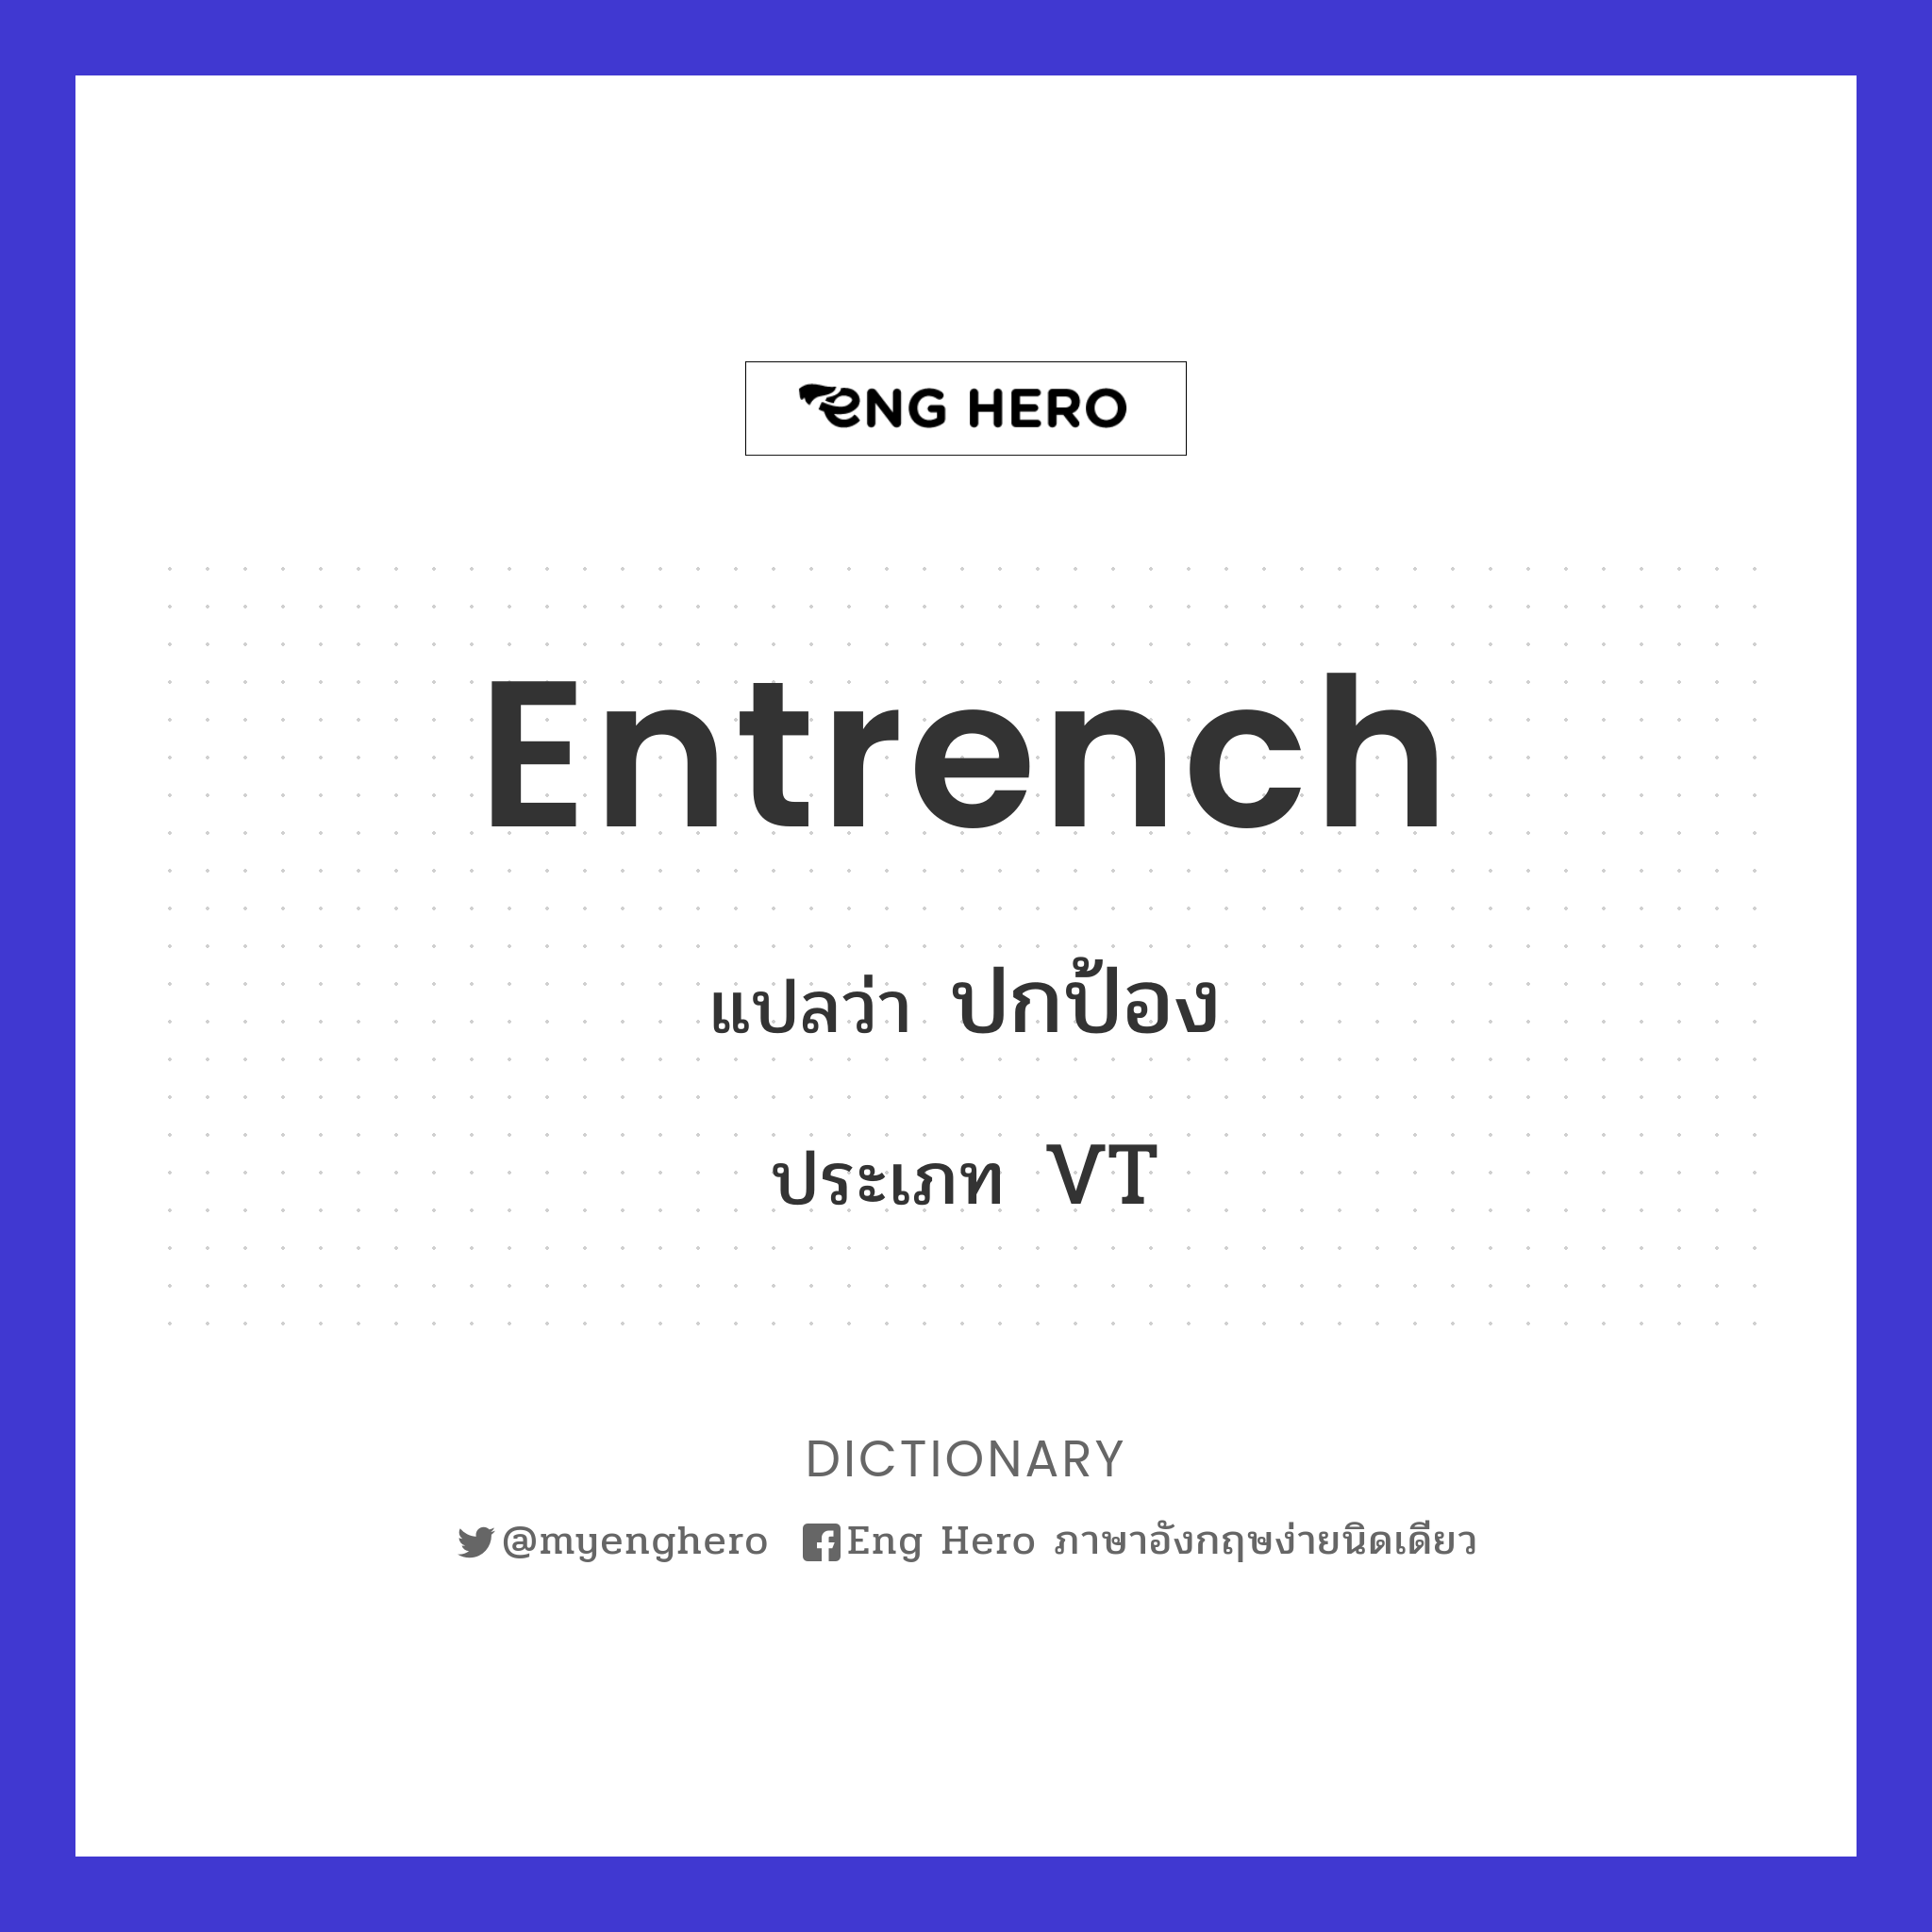 entrench